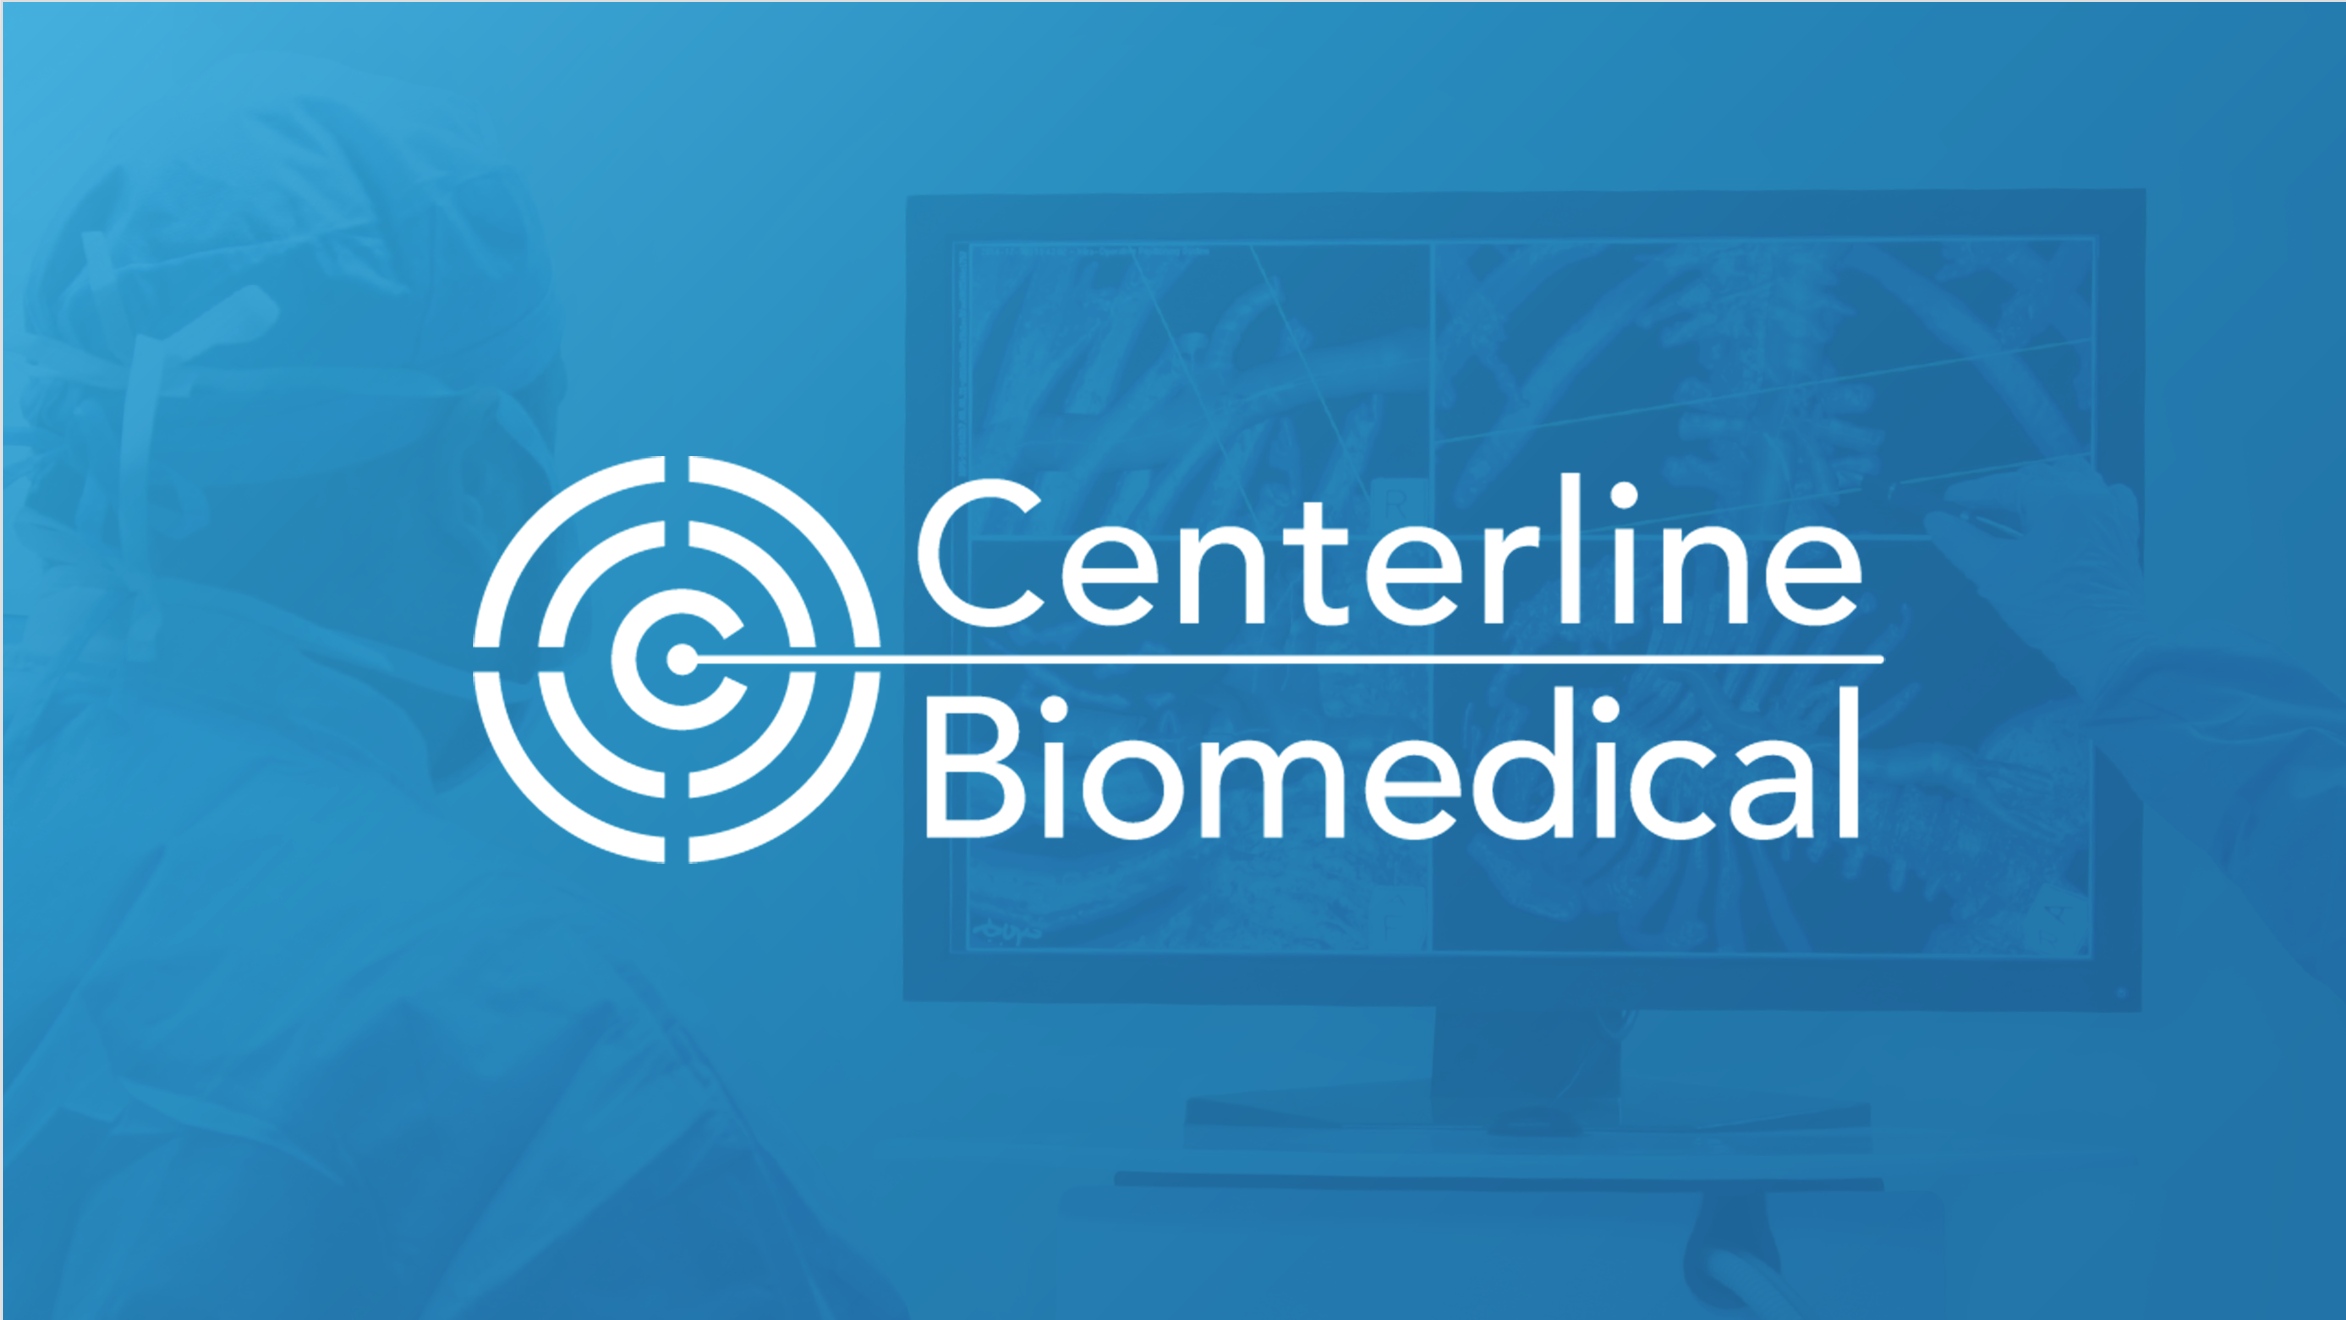 2017 Medical Device Conferences – Meet the Centerline Biomedical Team